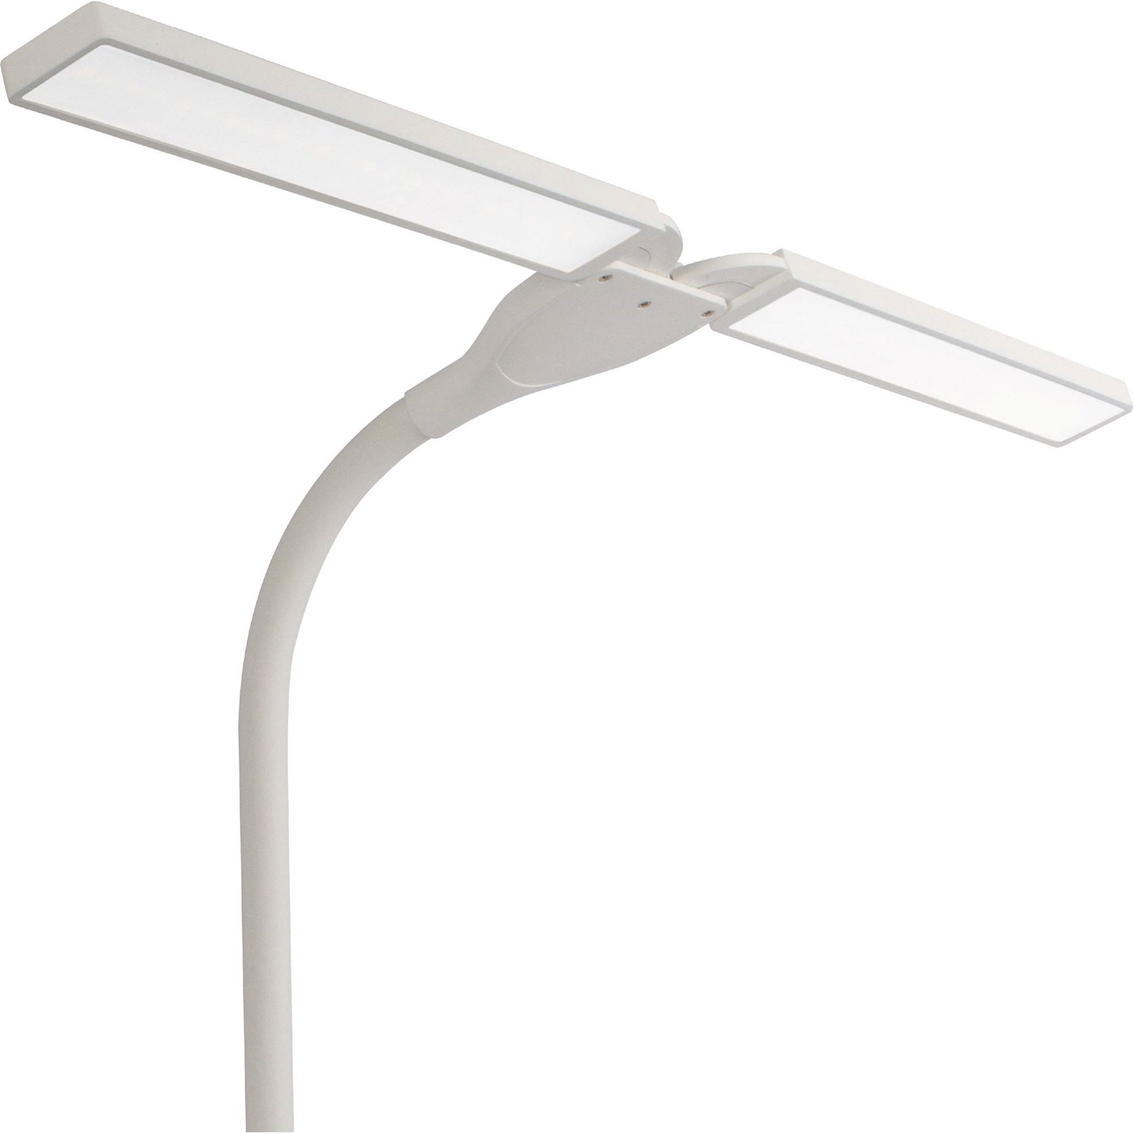 OttLite Wellness Series Pivot LED 13.5 in. Desk Lamp with Dual Shades - Image 4 of 6